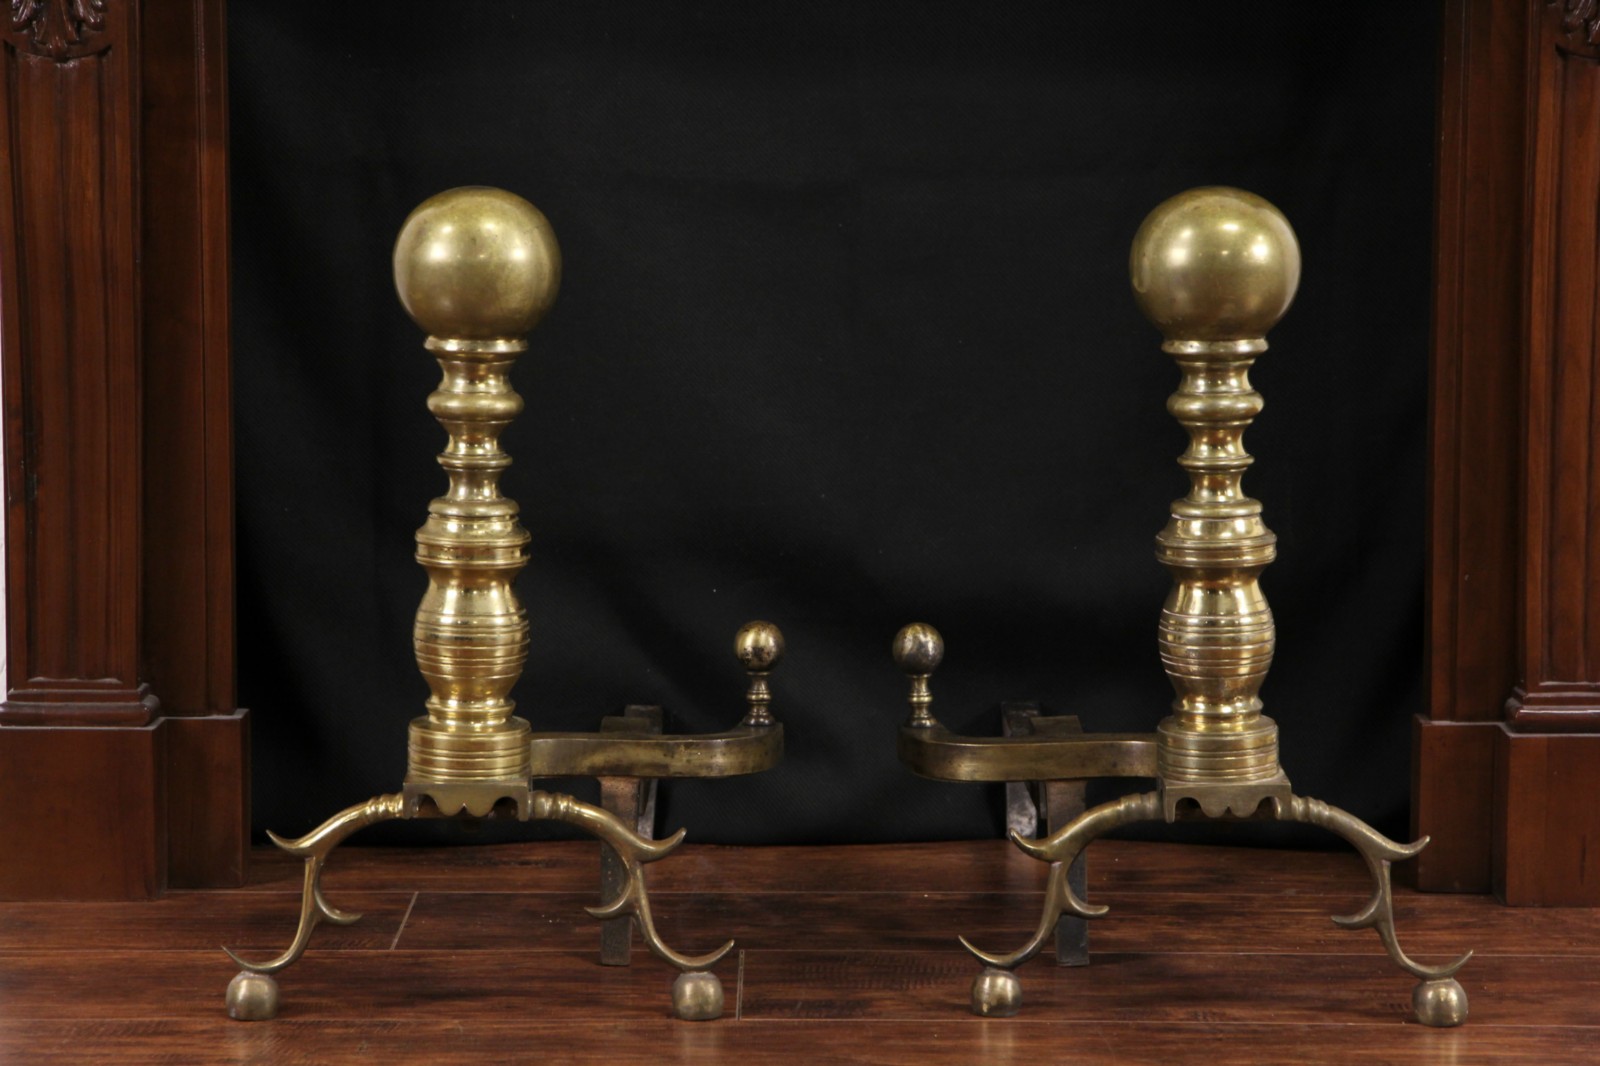 Pair of Harvin Company Brass Andirons